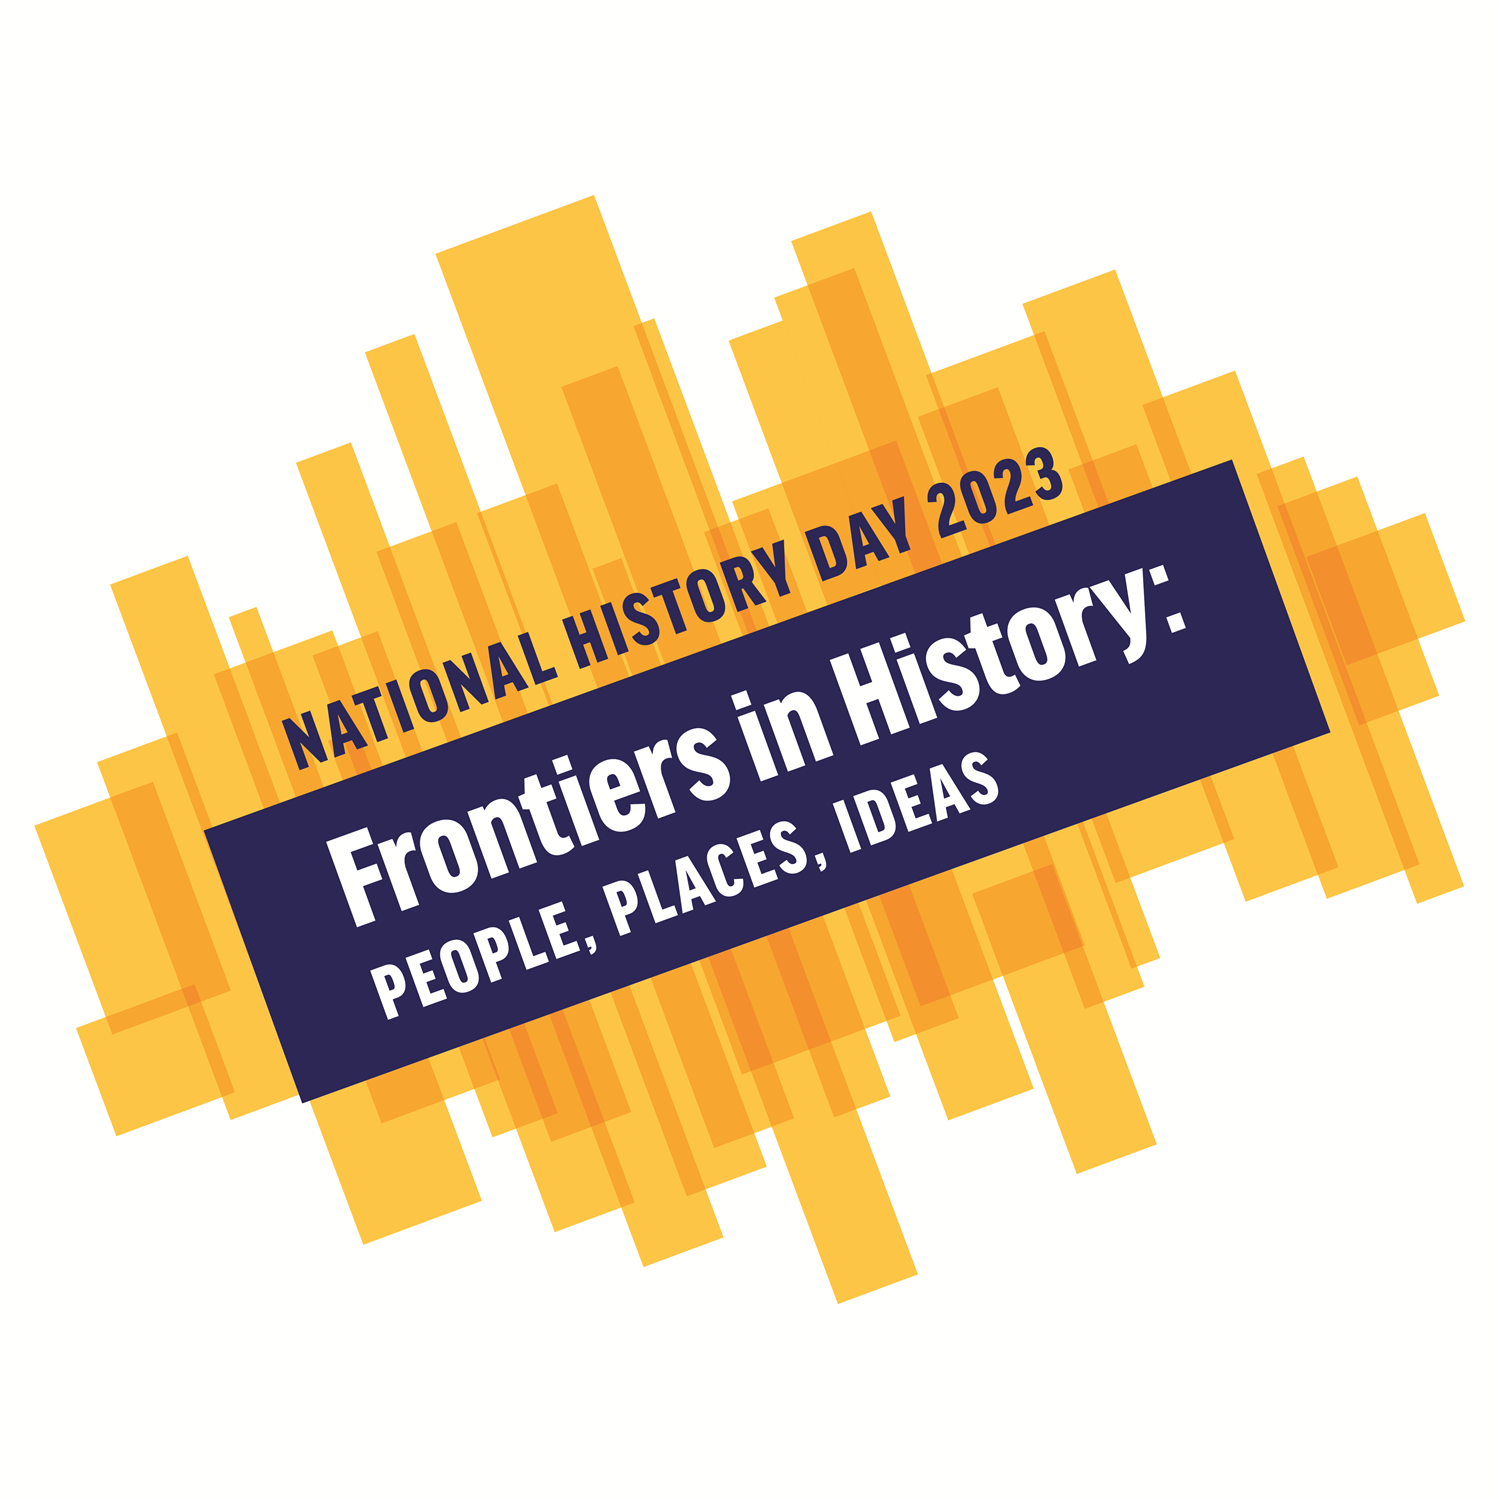 National History Day 2023 theme logo: Frontiers in History